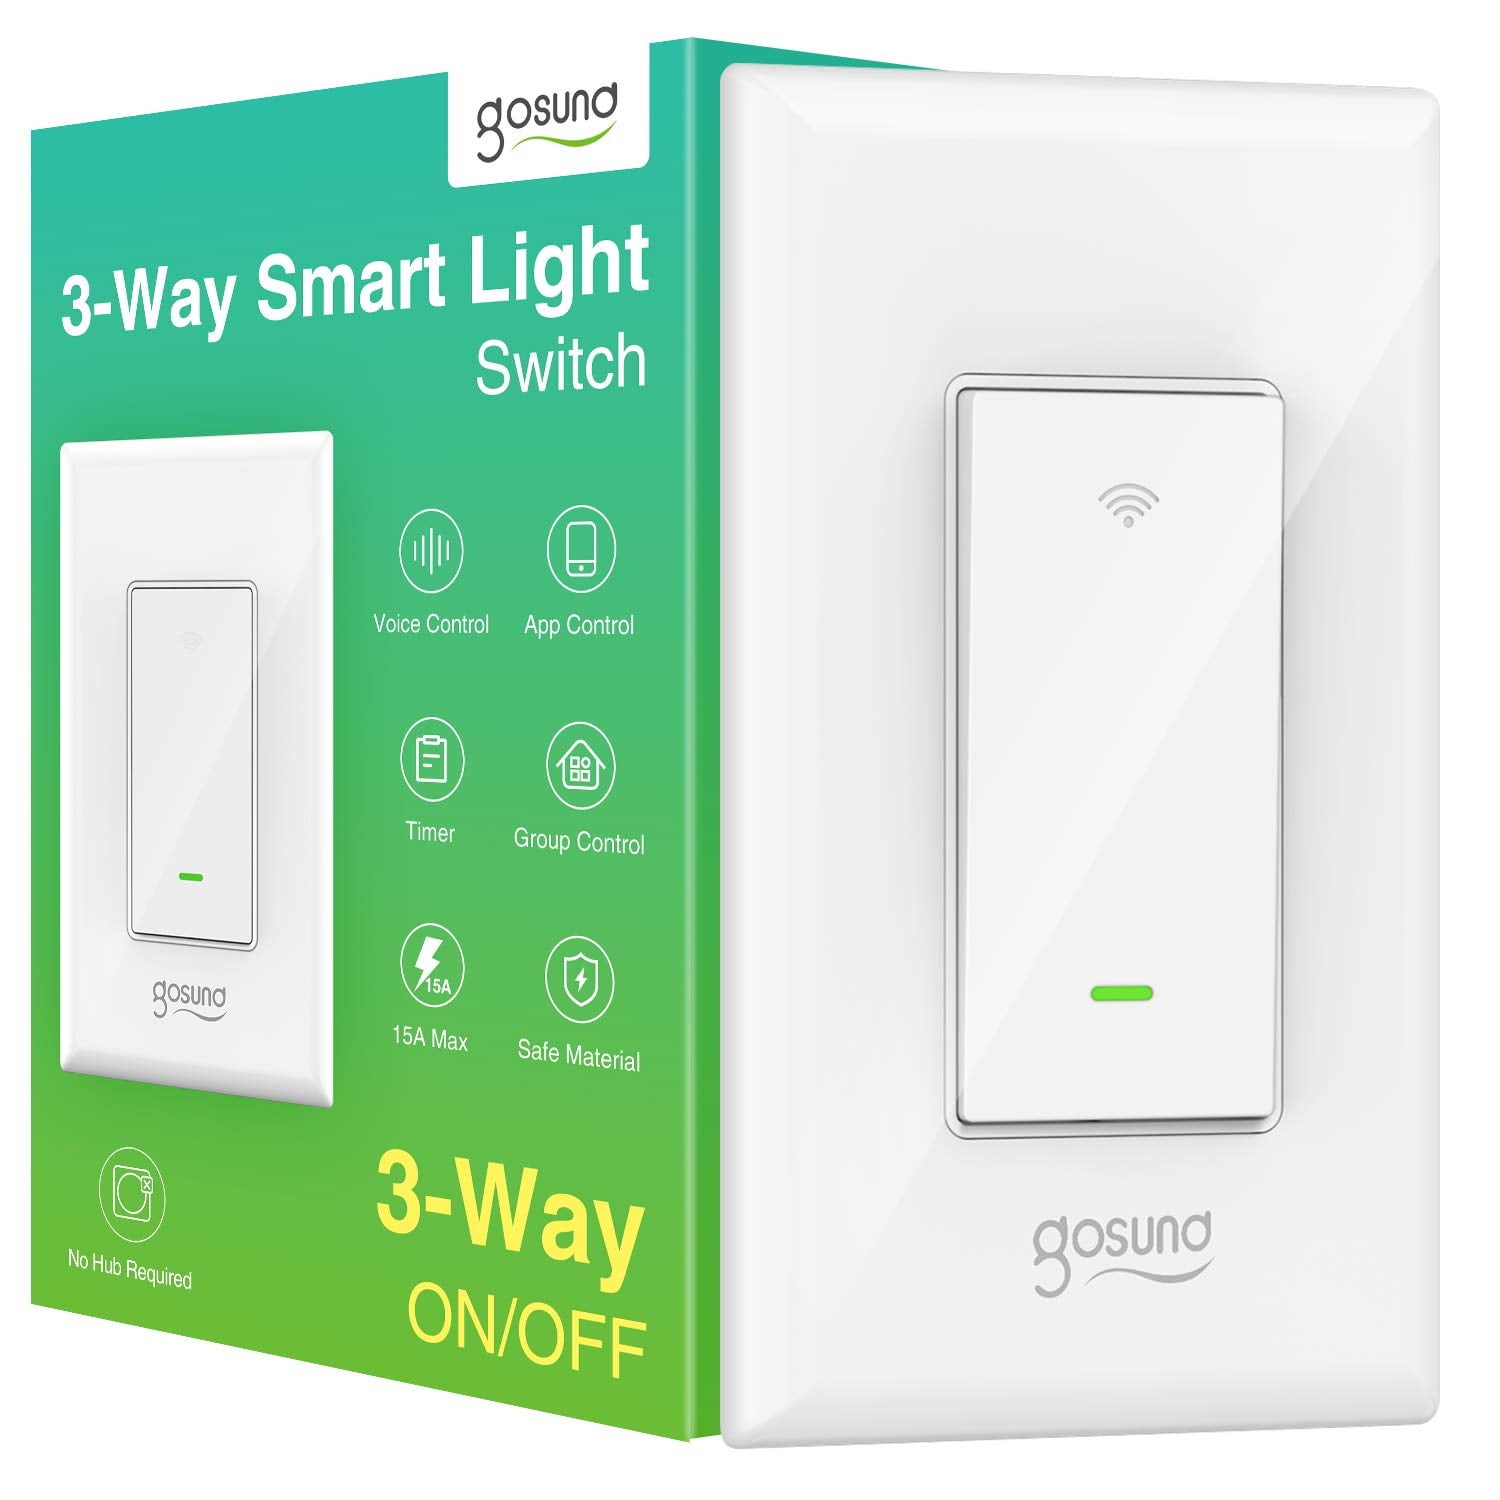 Smart Light Switch 2 Pack(Button), Double Smart WiFi Light Switches, Smart  Switch Compatible with Alexa and Google Home, Remote Control Light Switch，Neutral  Wire Needed ， No hub Required - Yahoo Shopping